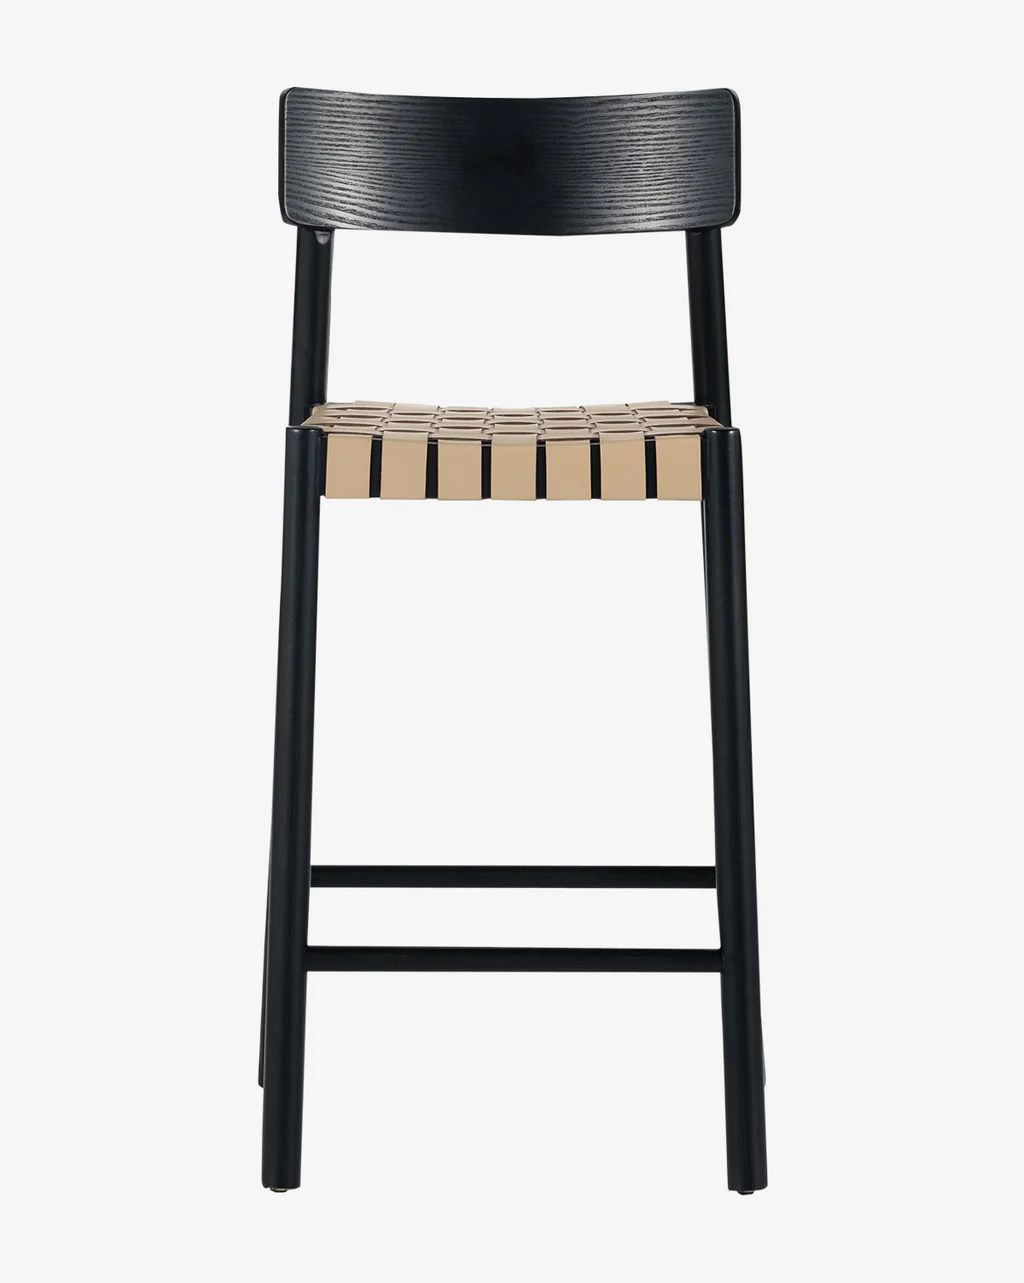 Robson Stool | McGee & Co.